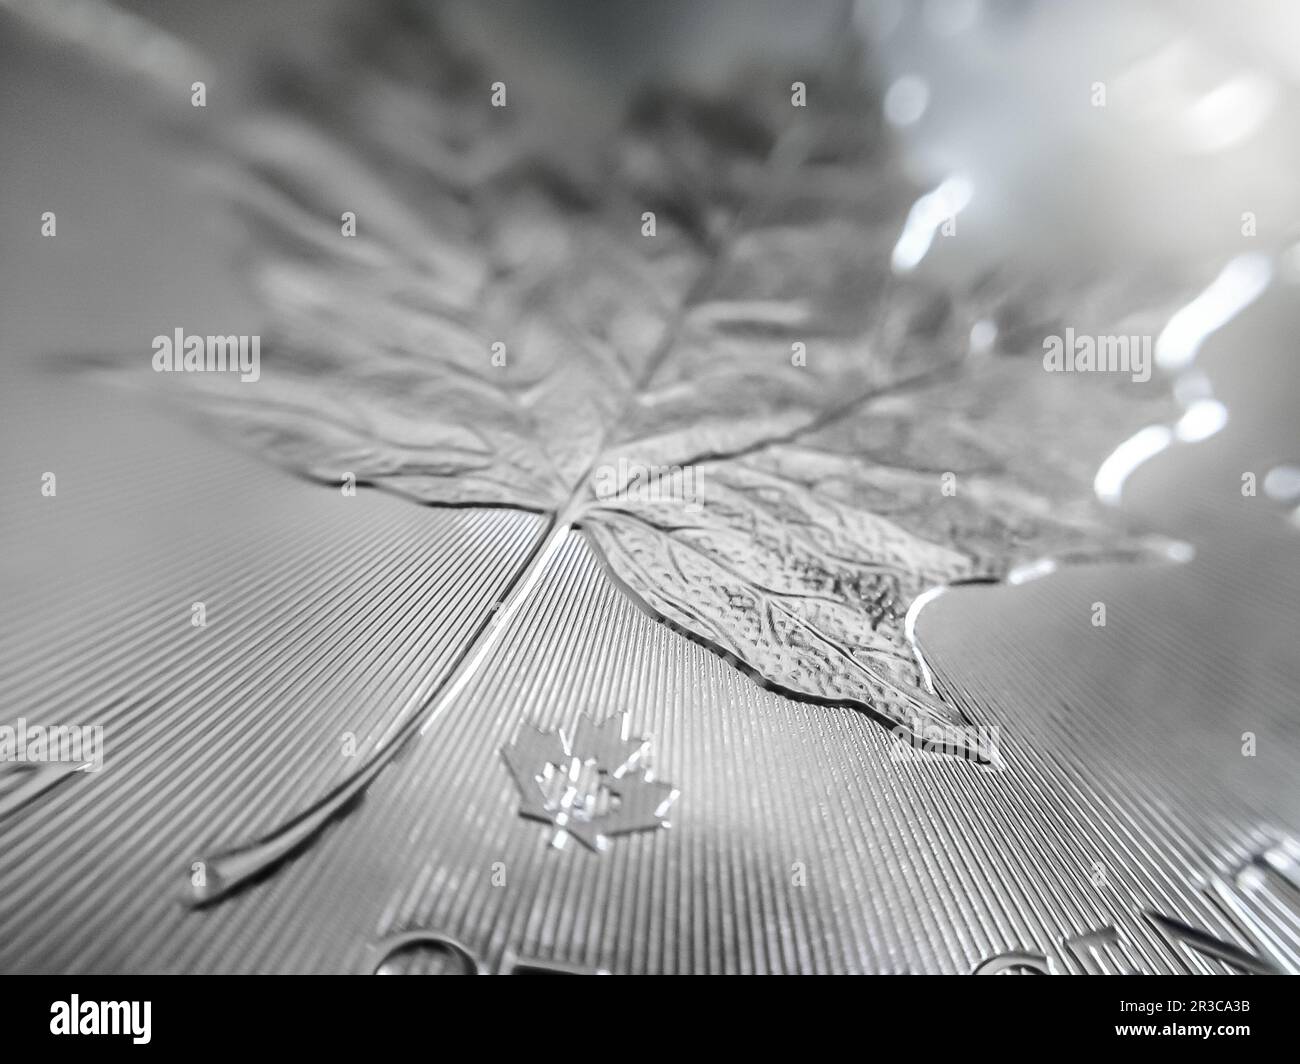 Macro close up of a pure Silver Bullion coin Stock Photo